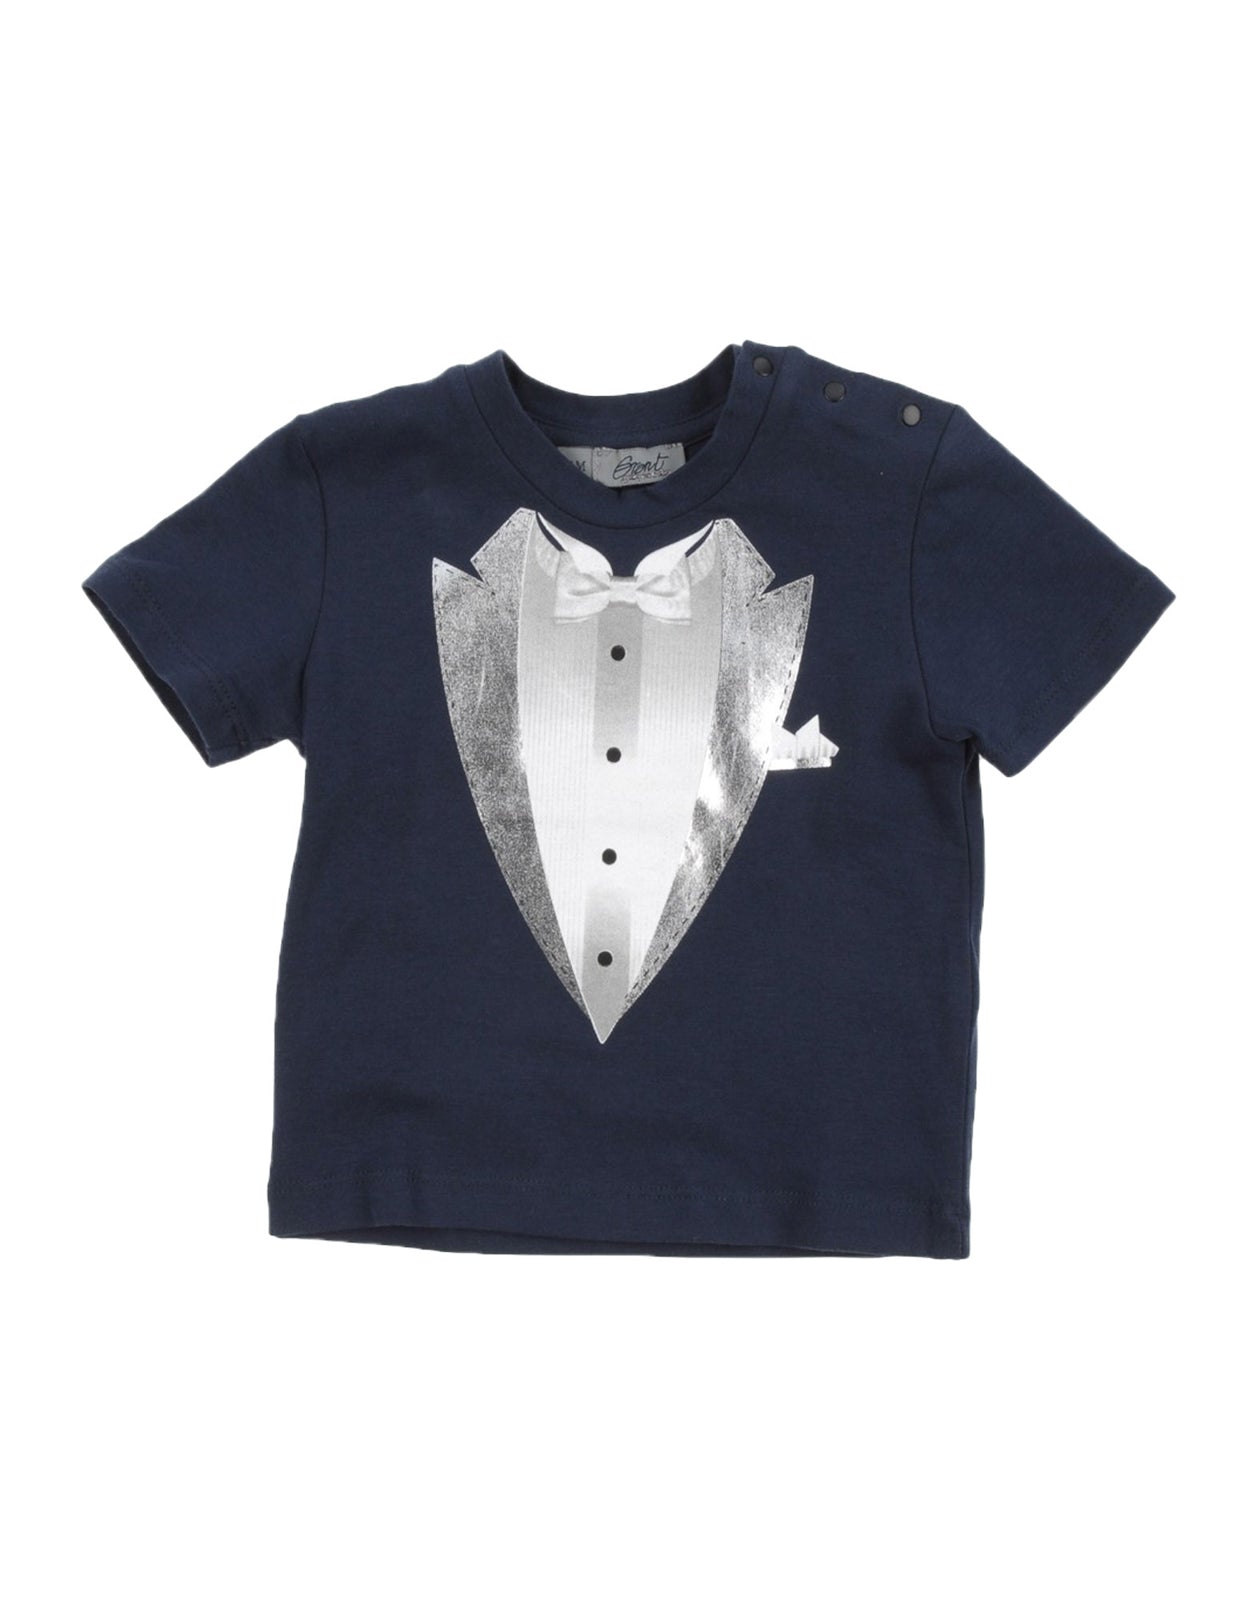 GRANT GARCON BABY T-Shirt Top Size 9M / 68-74CM Coated Tuxedo gallery main photo